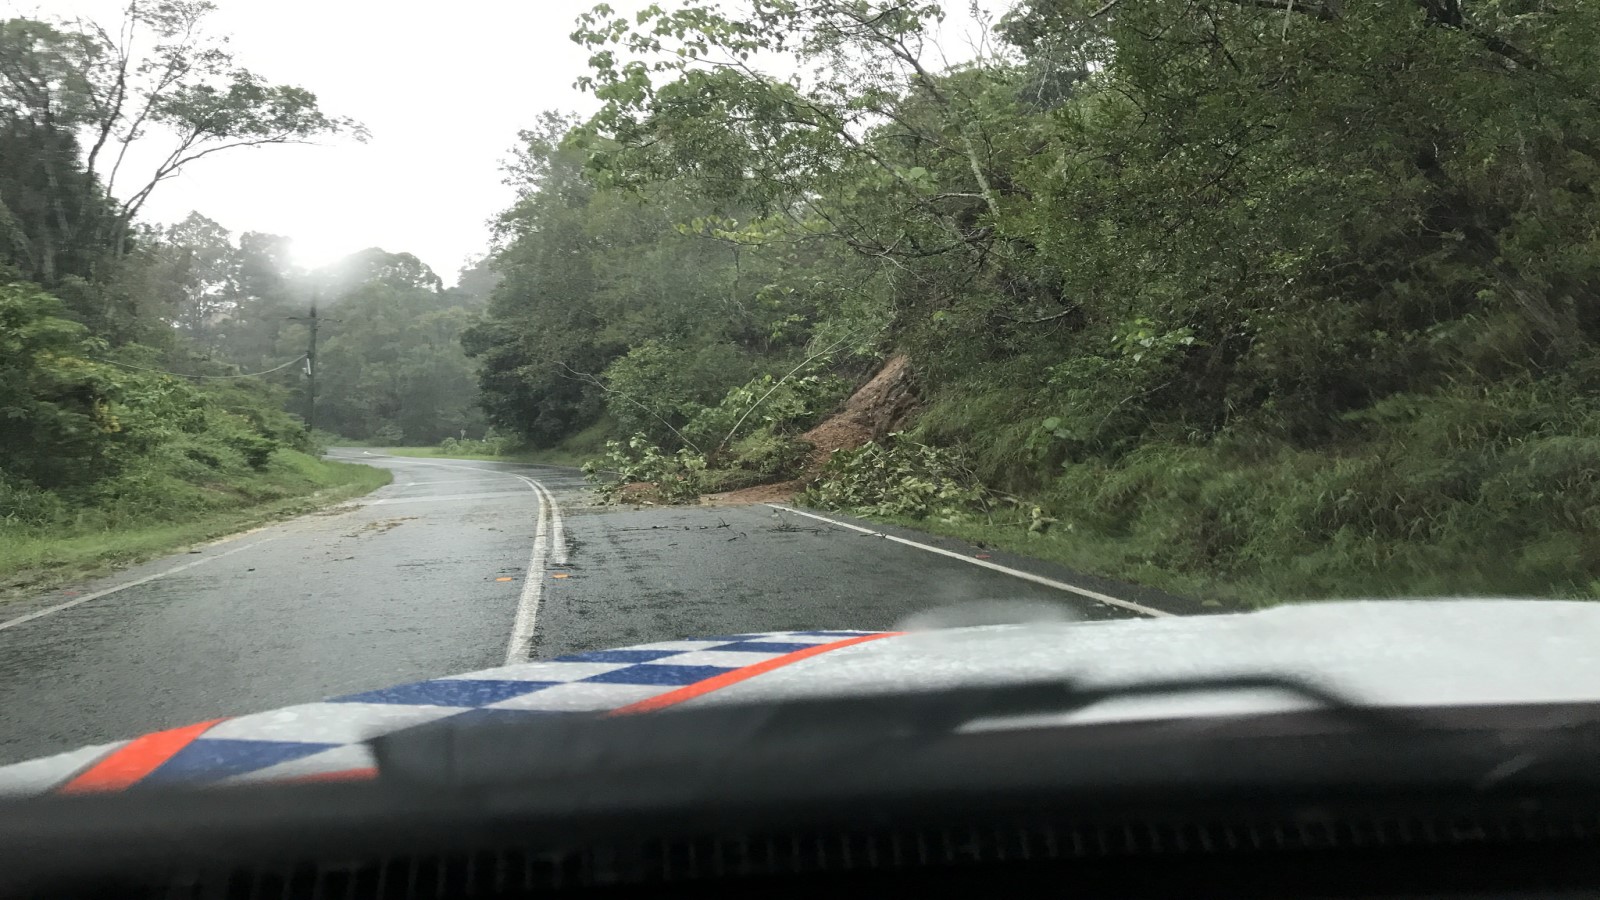 Landslide covering a road from the view of a police car